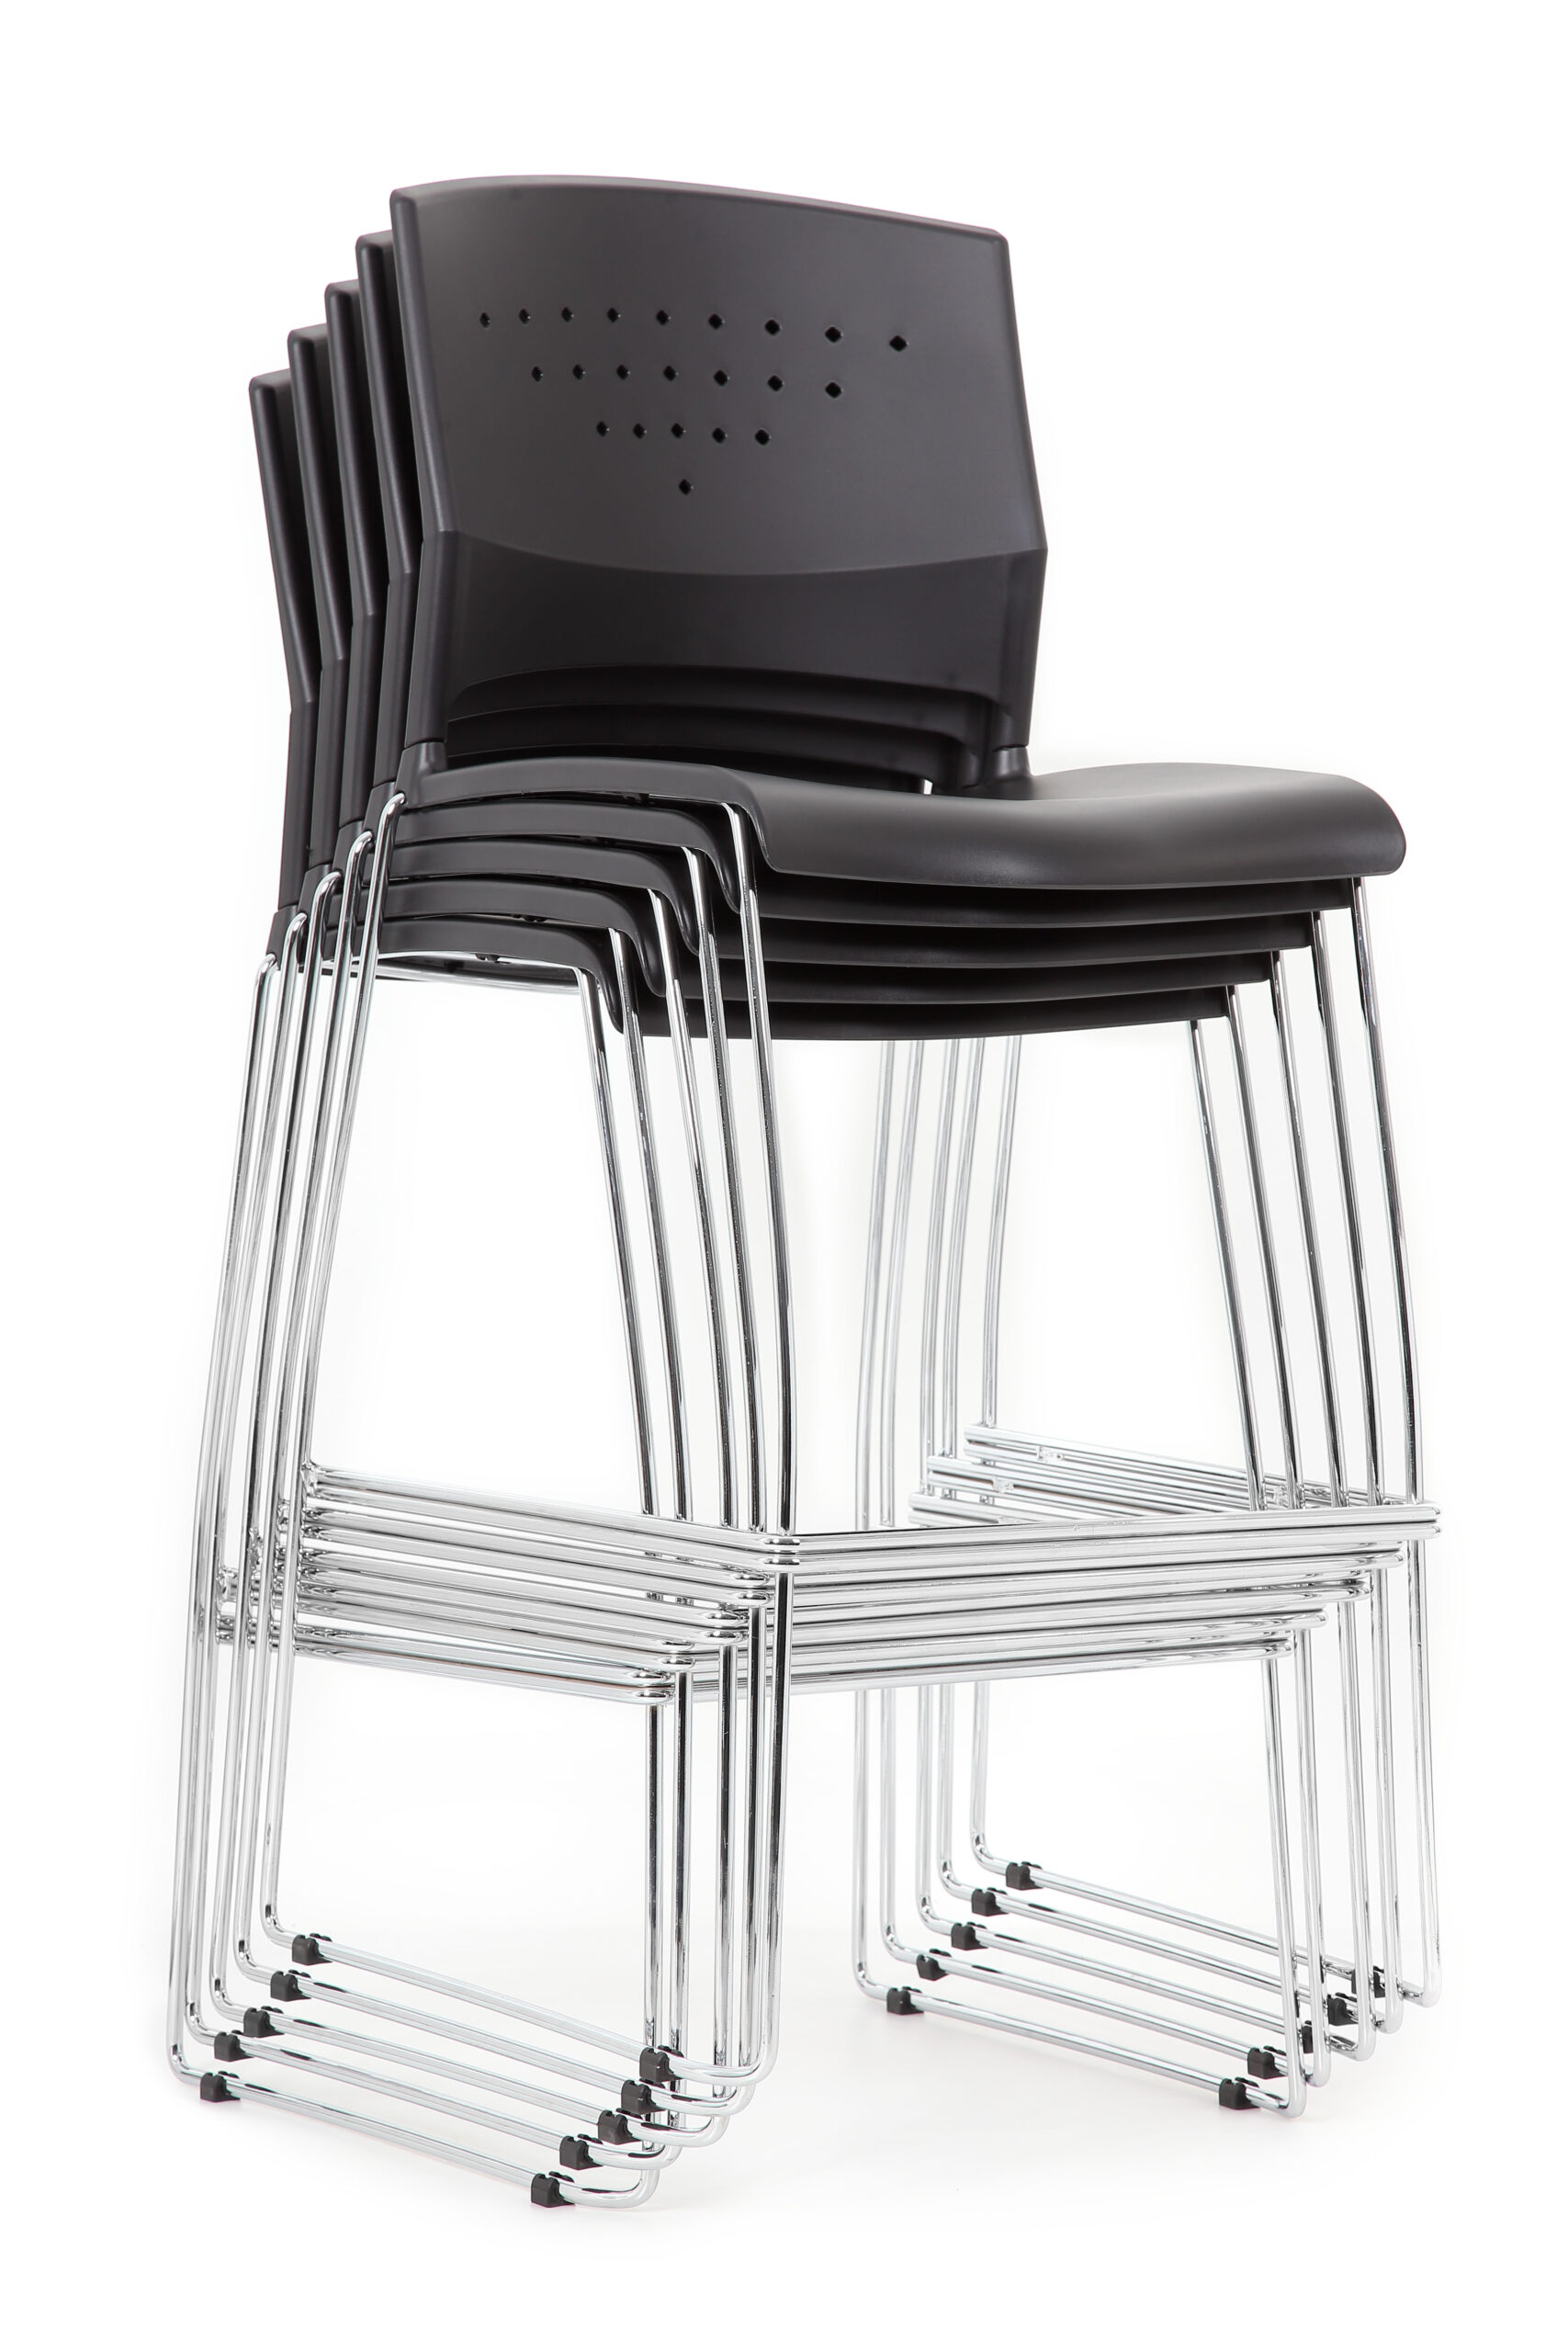 Stack Stool of With Black Frame 2) Chrome – BossChair Boss (set